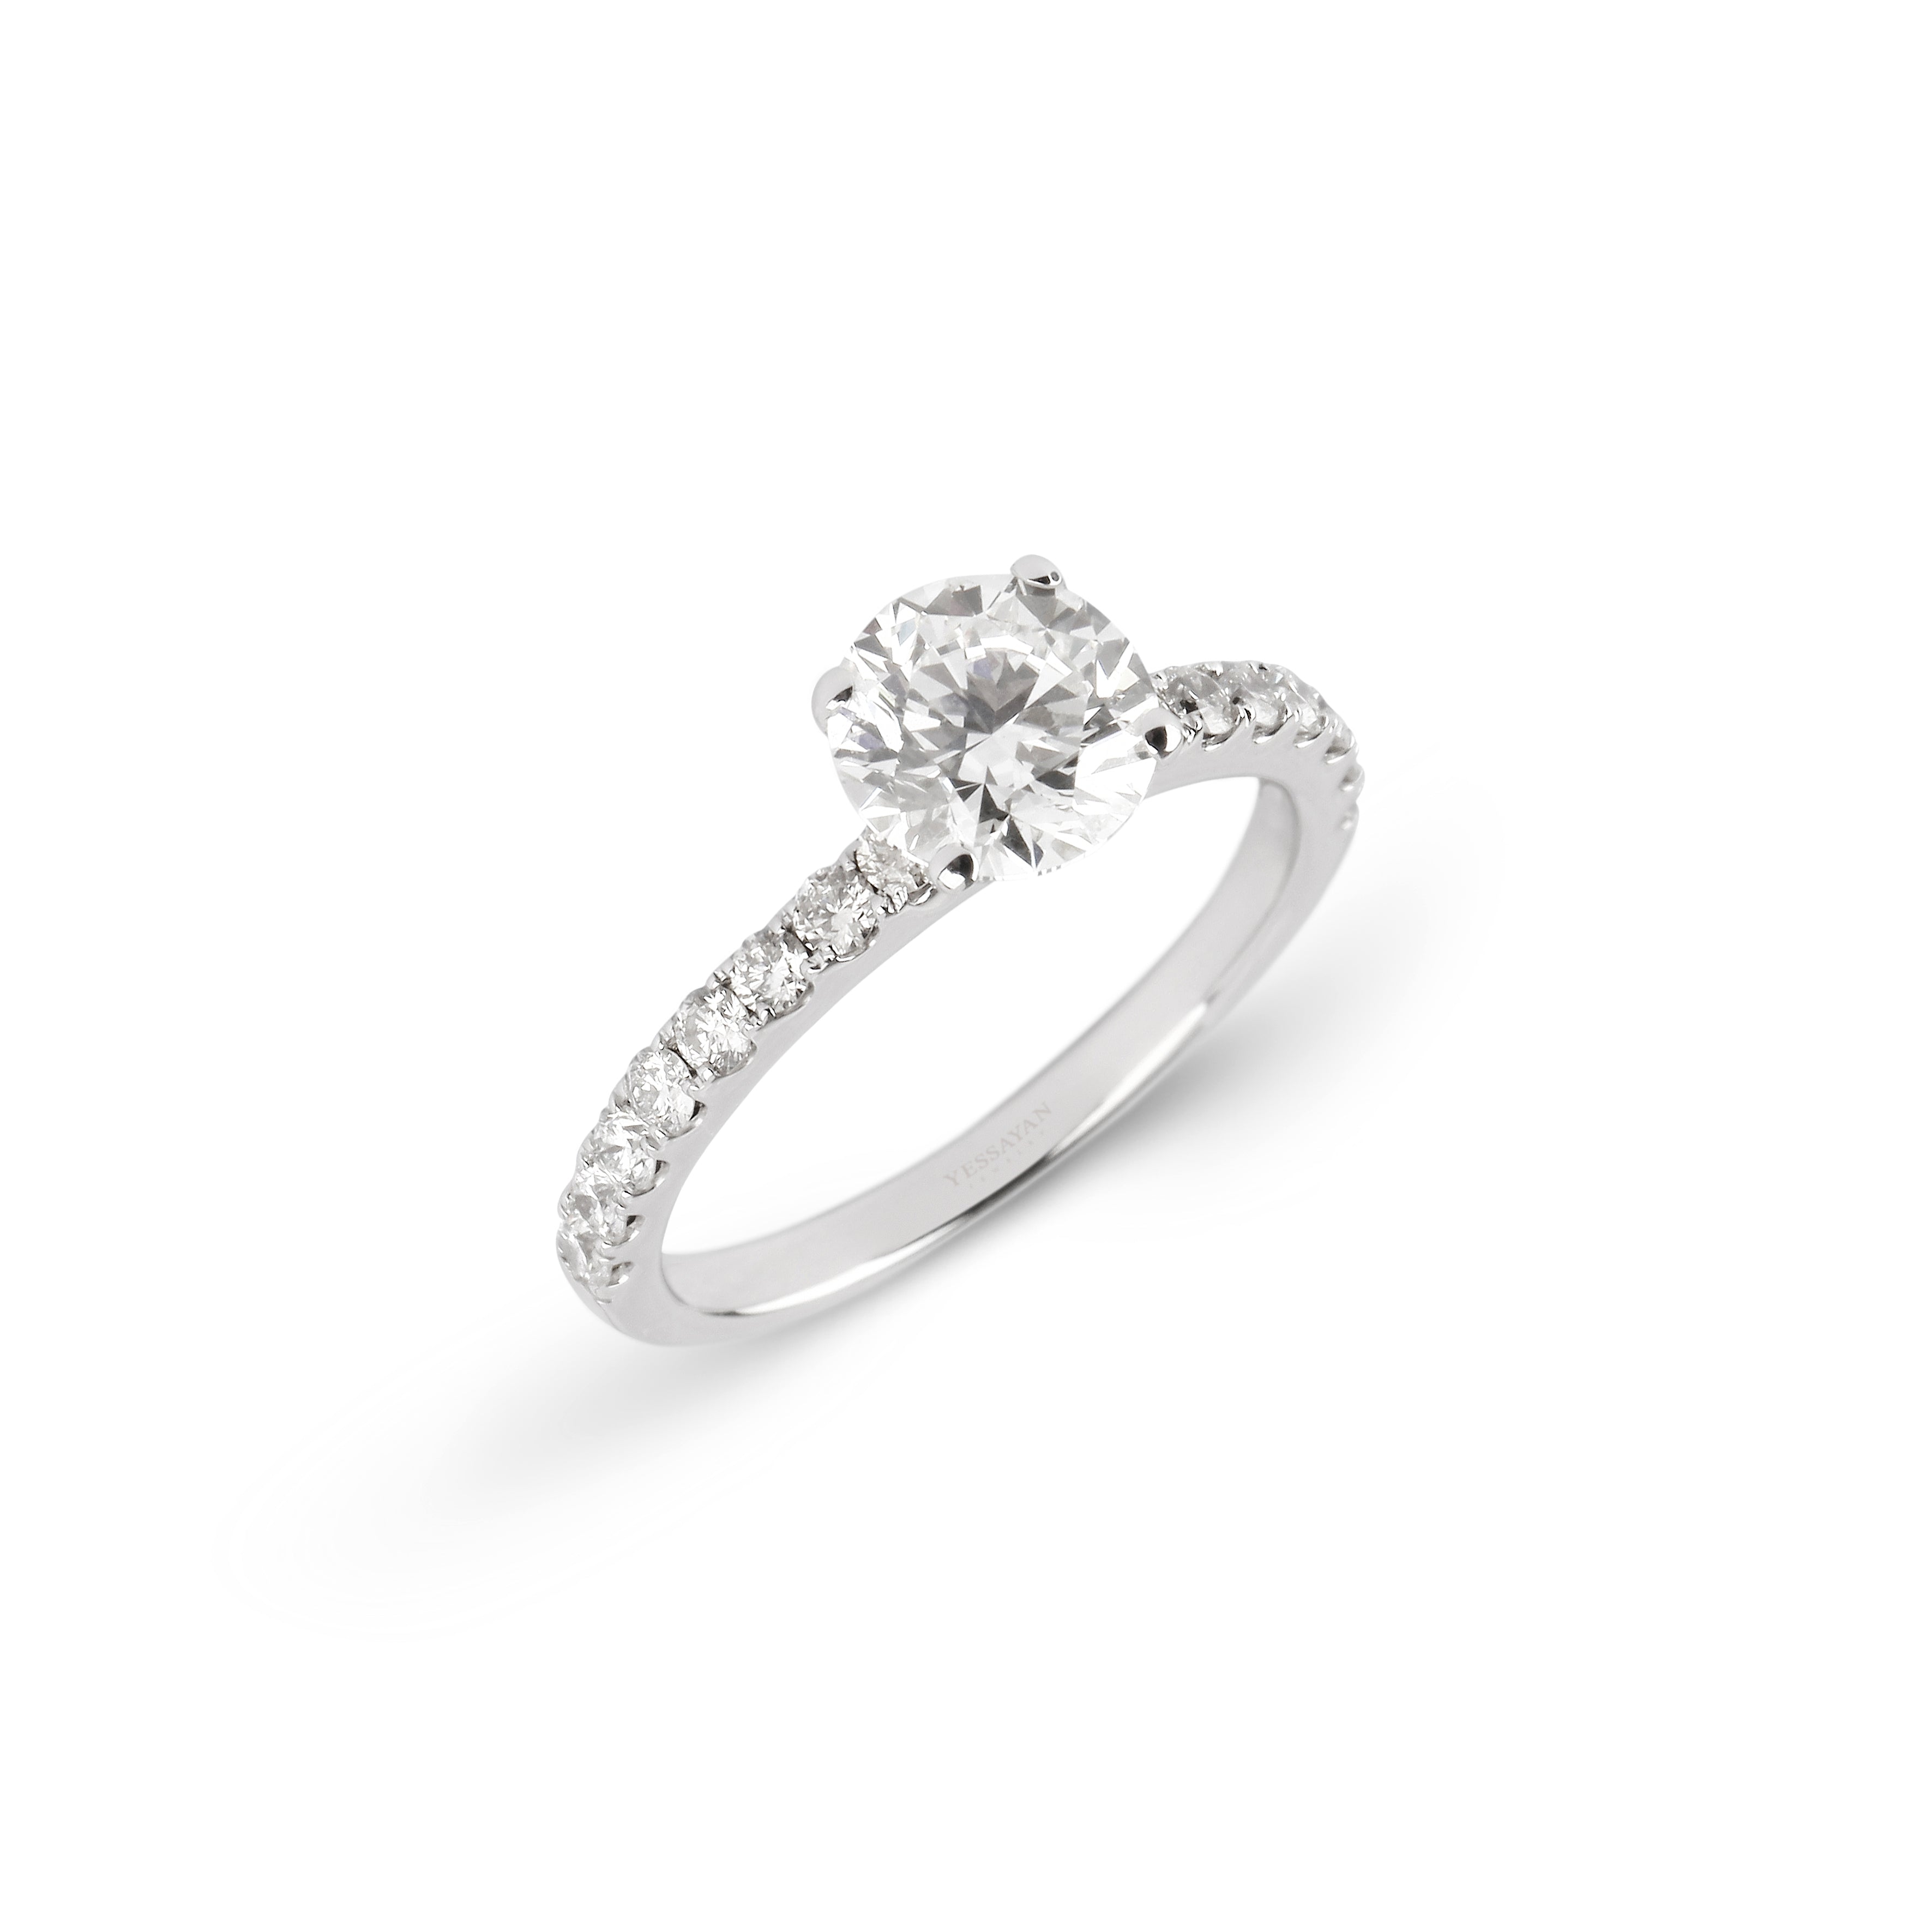 Certified Solitaire Diamond Ring | solitaire ring | buy rings online